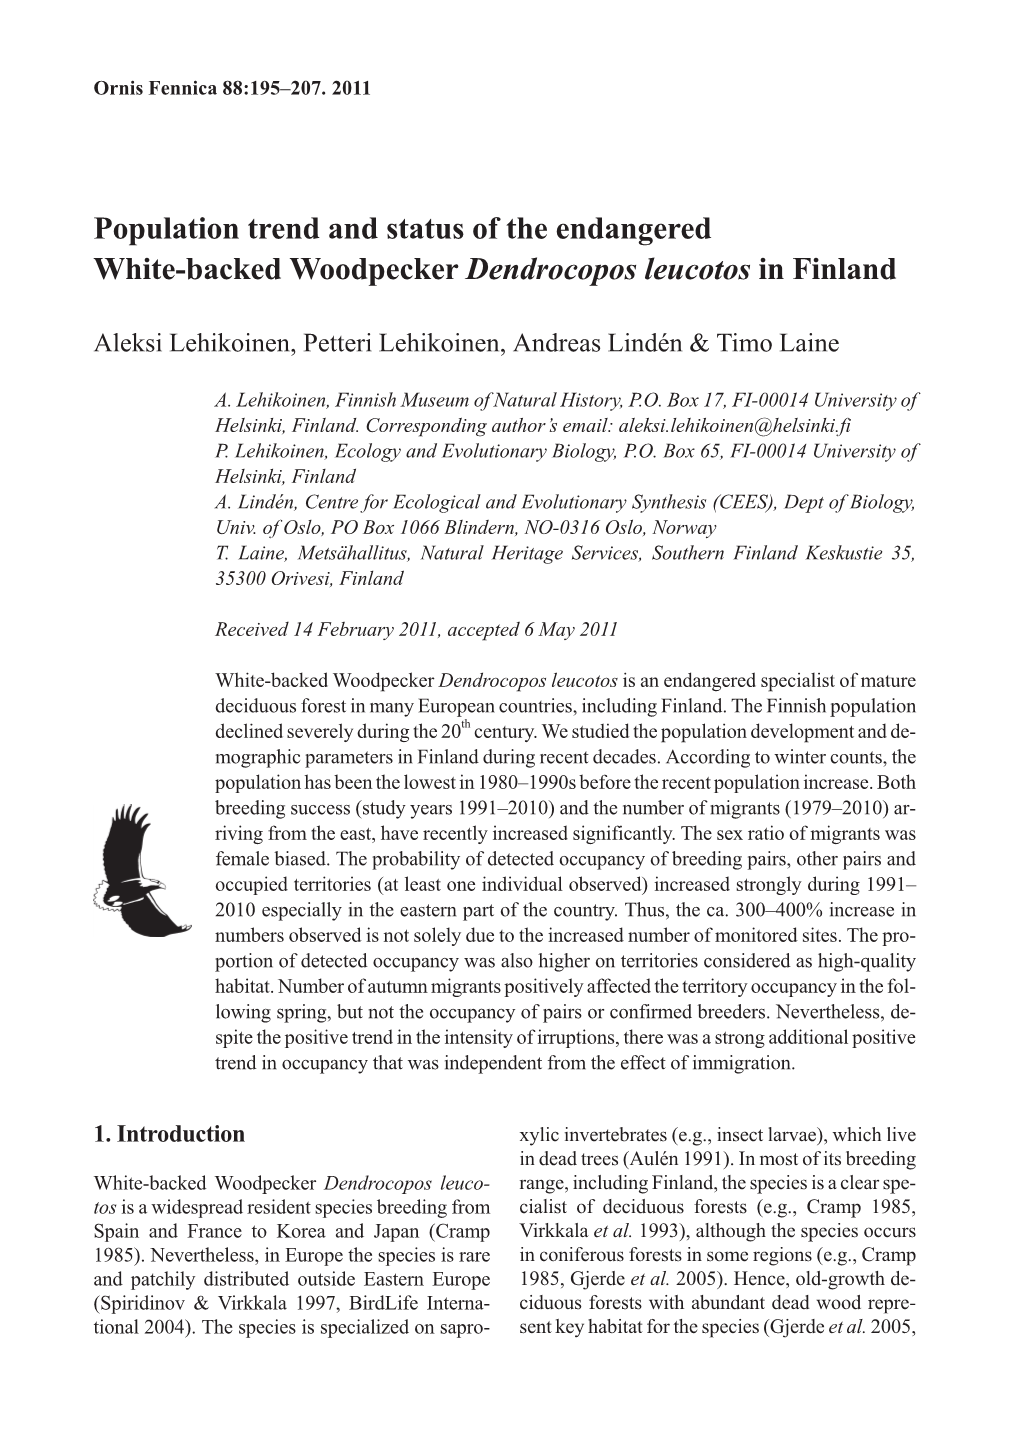 Population Trend and Status of the Endangered White-Backed Woodpecker Dendrocopos Leucotos in Finland